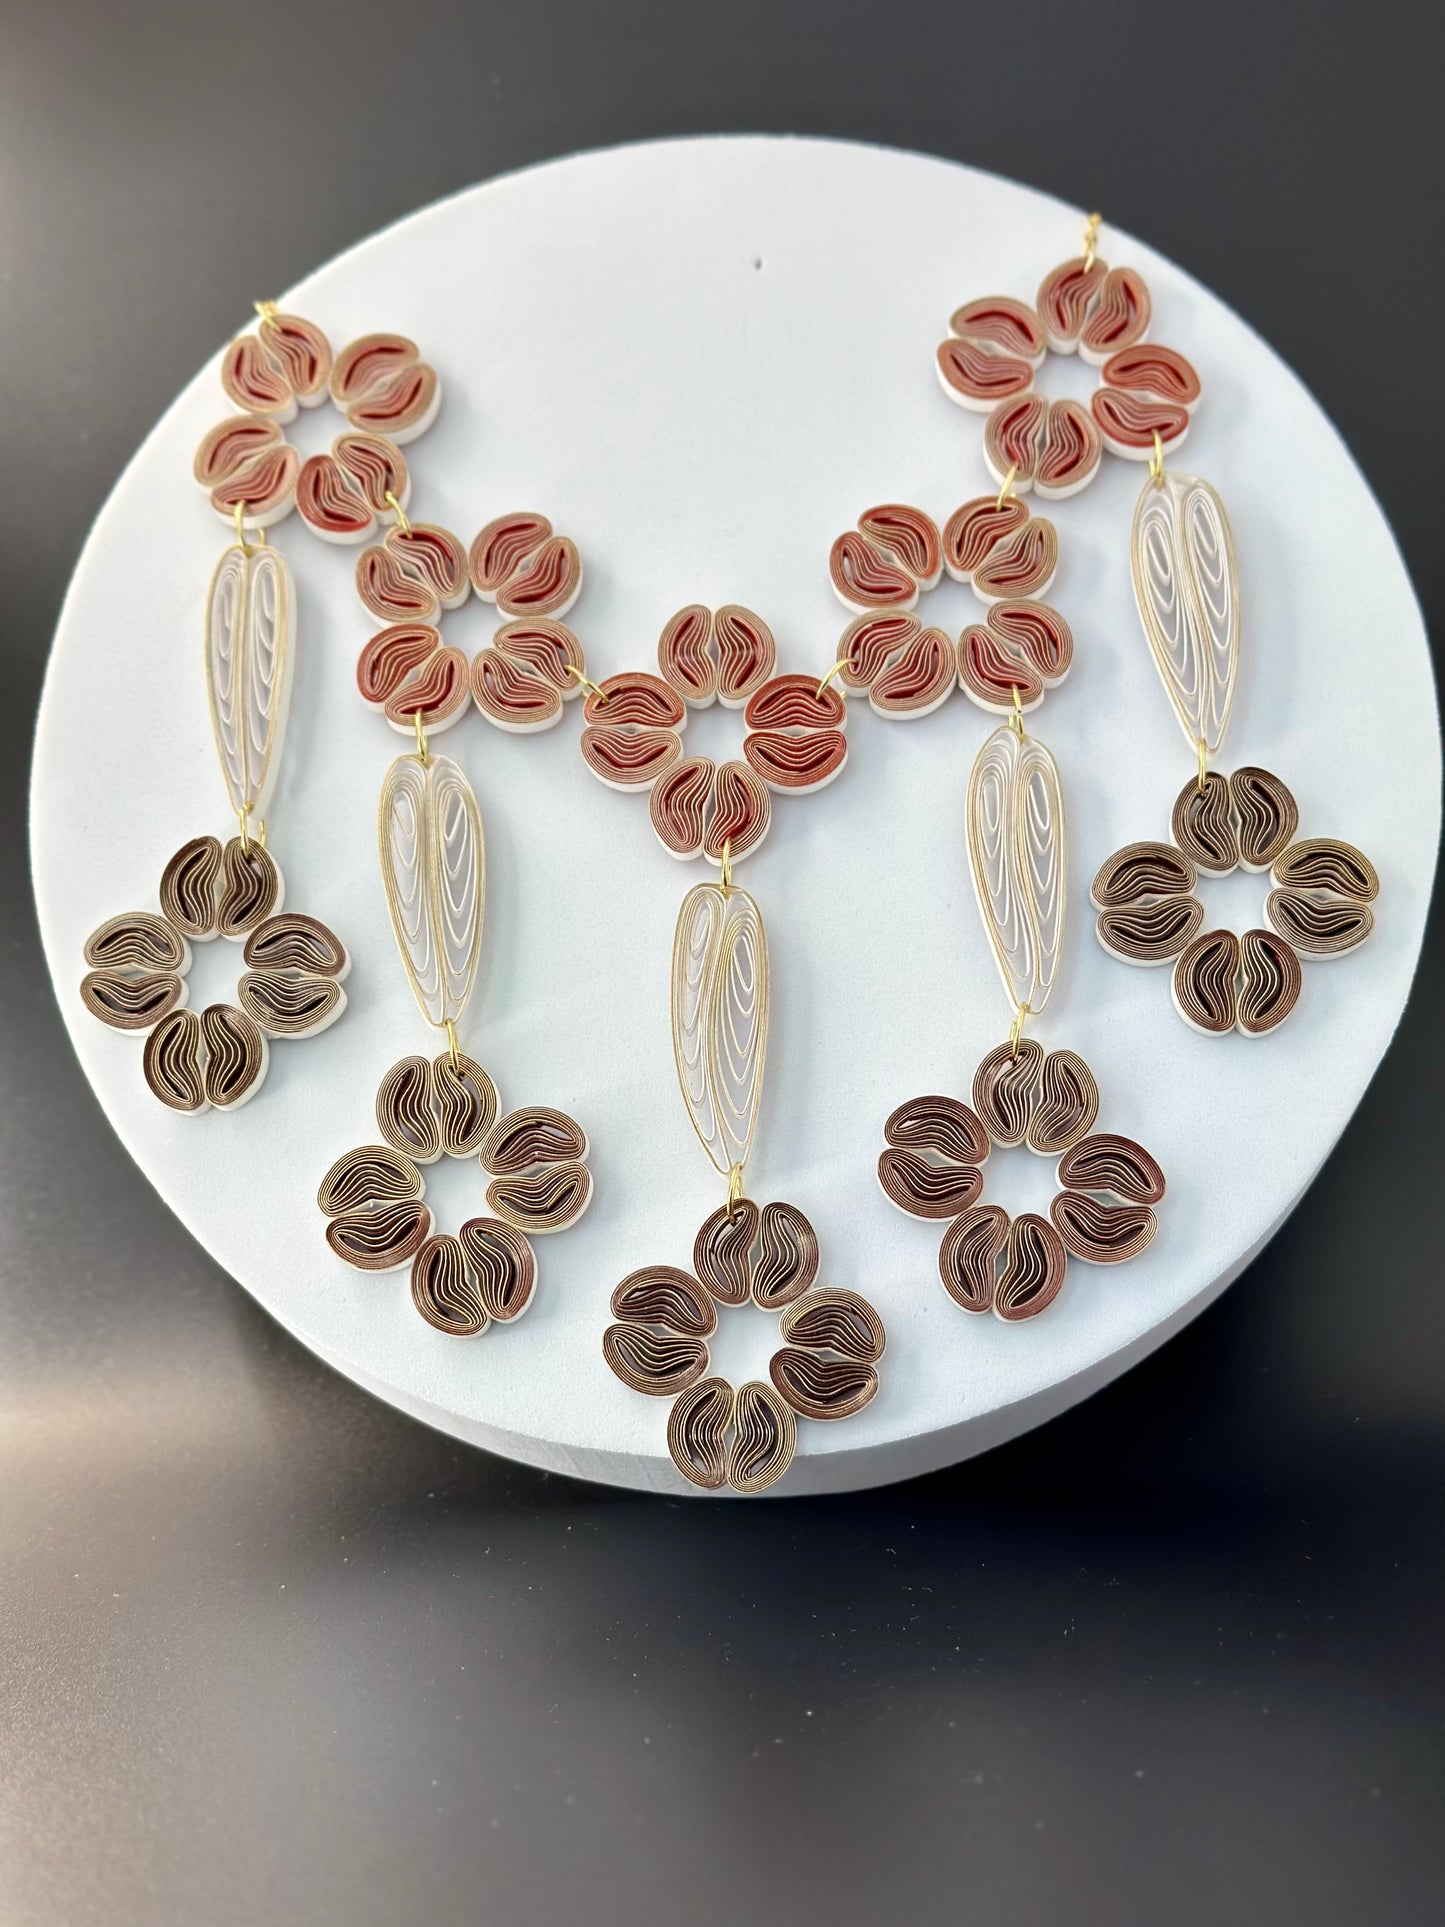 Flowerful Cascade Statement Necklace, Made with Paper